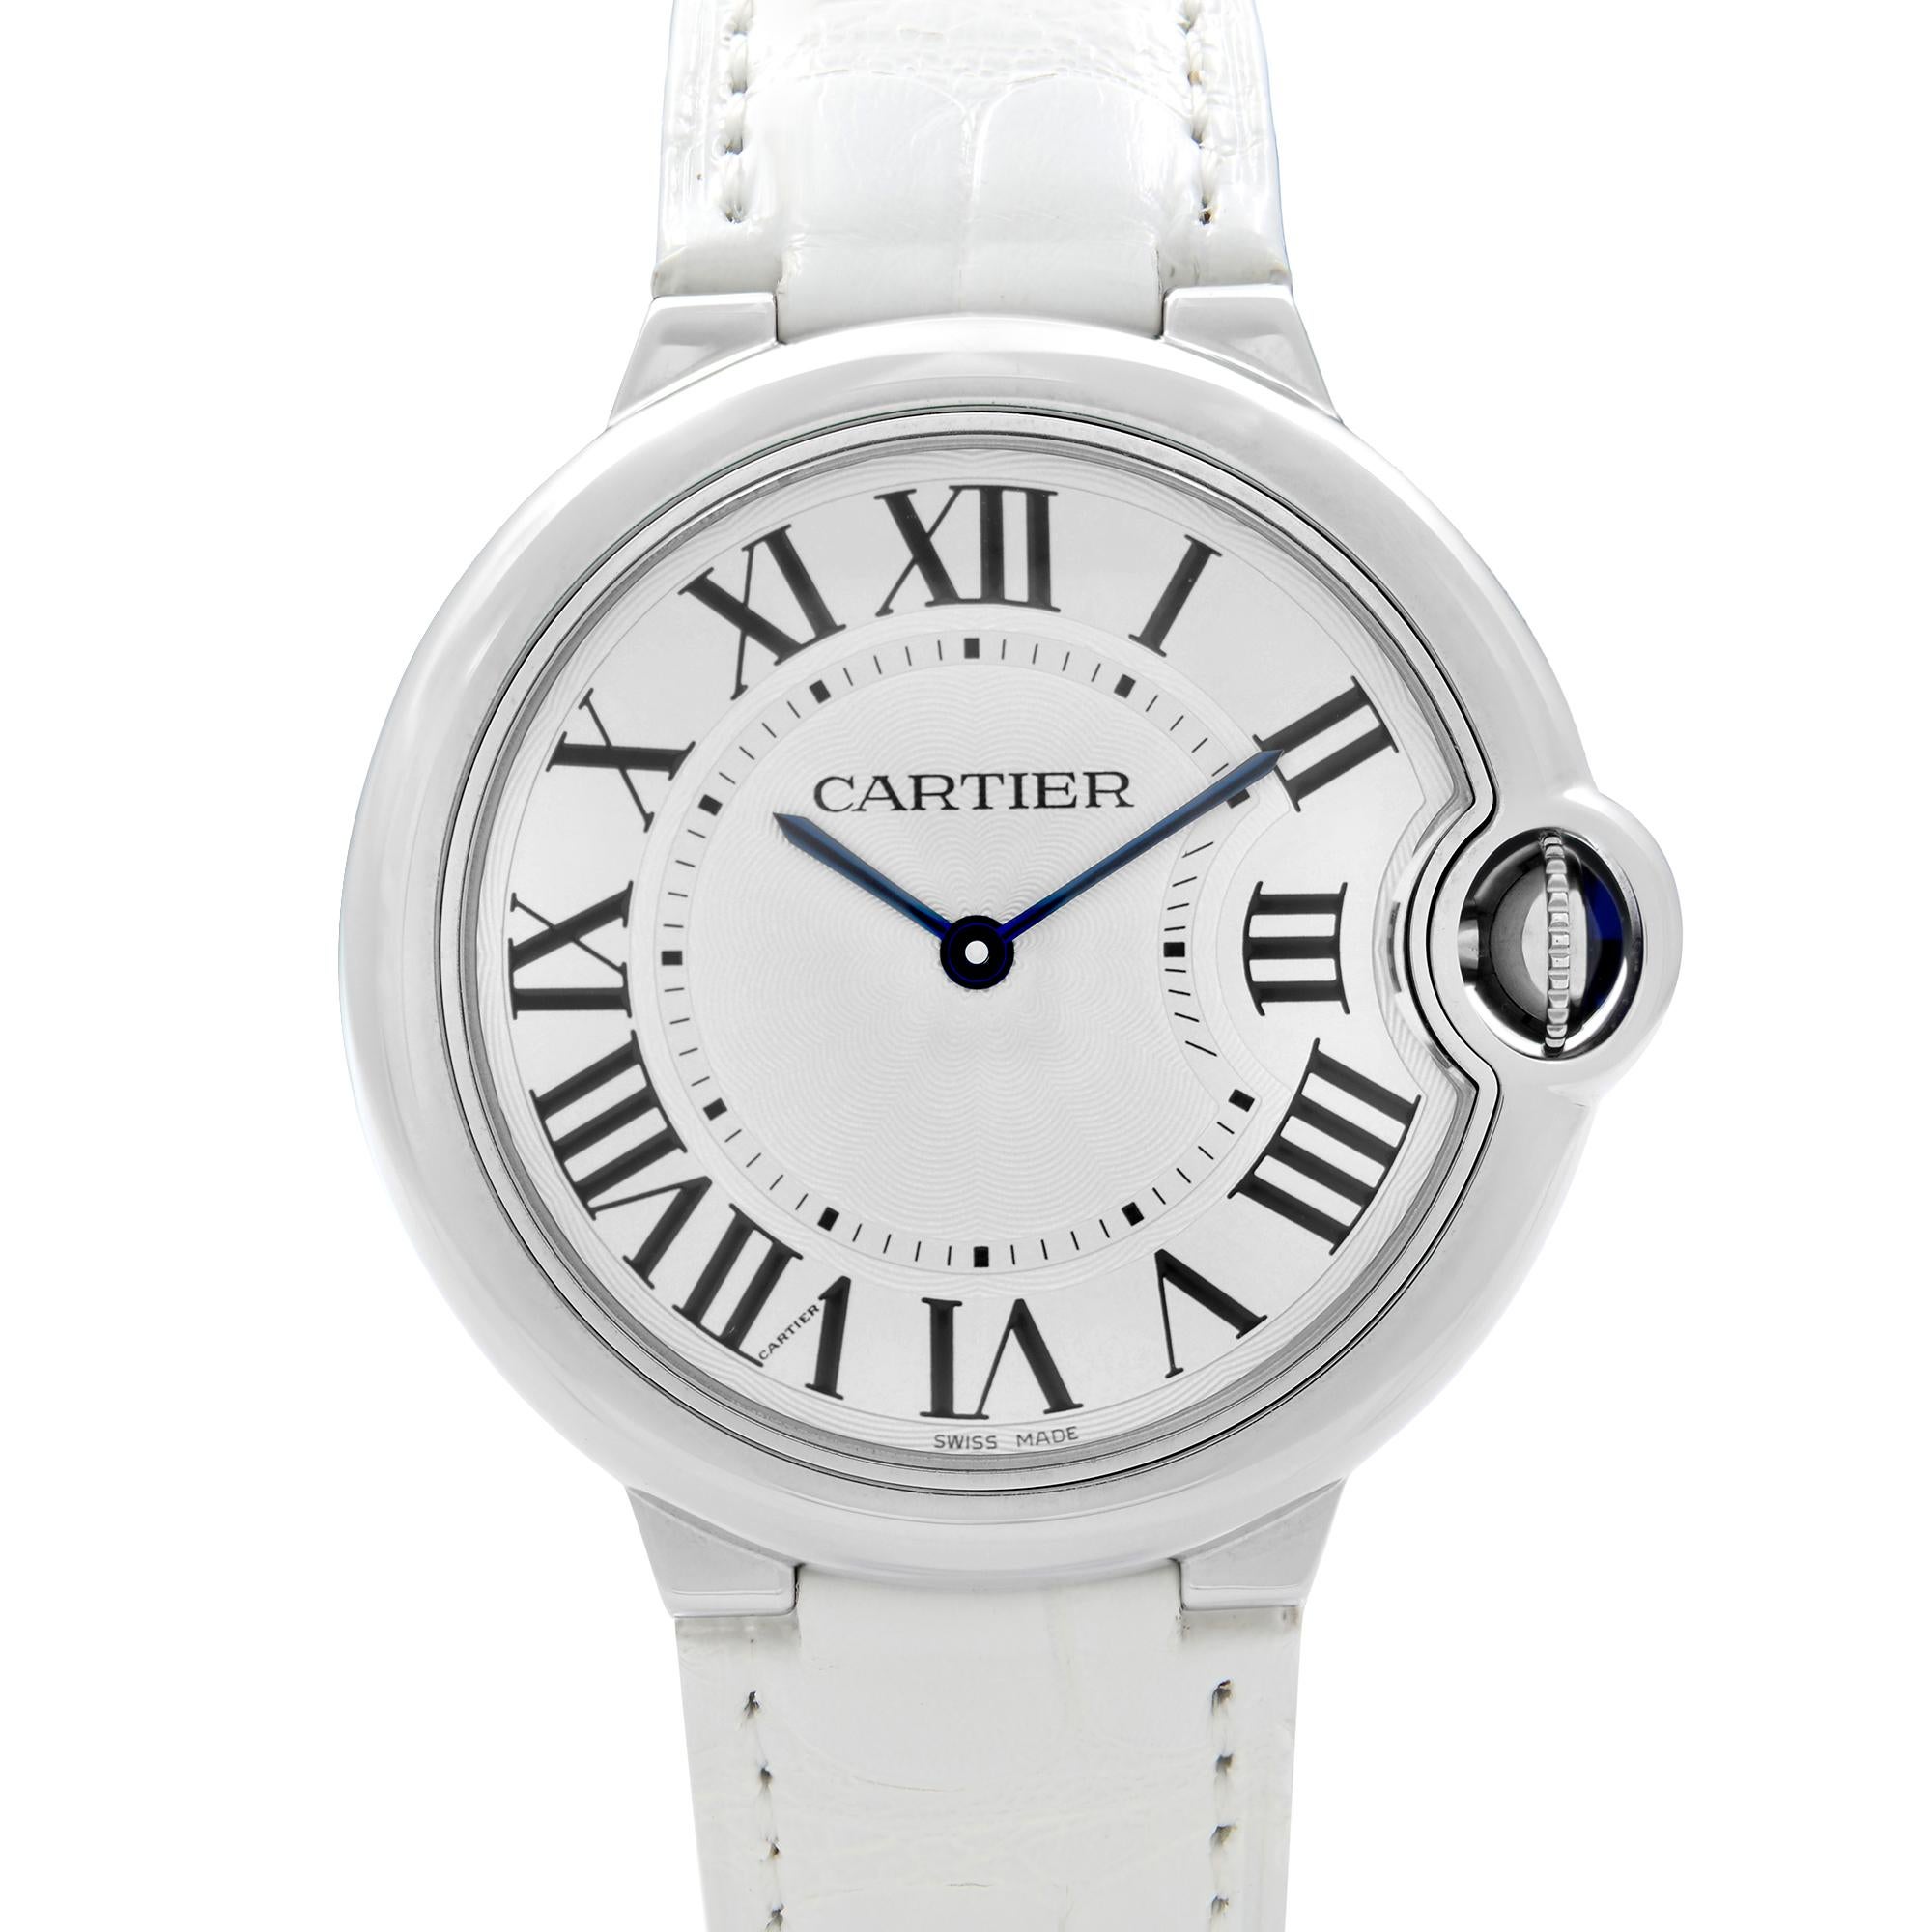 Pre Owned Like New Cartier Ballon Bleu 36mm Steel Silver Dial Automatic Unisex Quartz Watch 3005. This Beautiful Timepiece is Powered by Quartz (Battery) Movement And Features: Round Stainless Steel Case with a White Leather Strap, Fixed Stainless